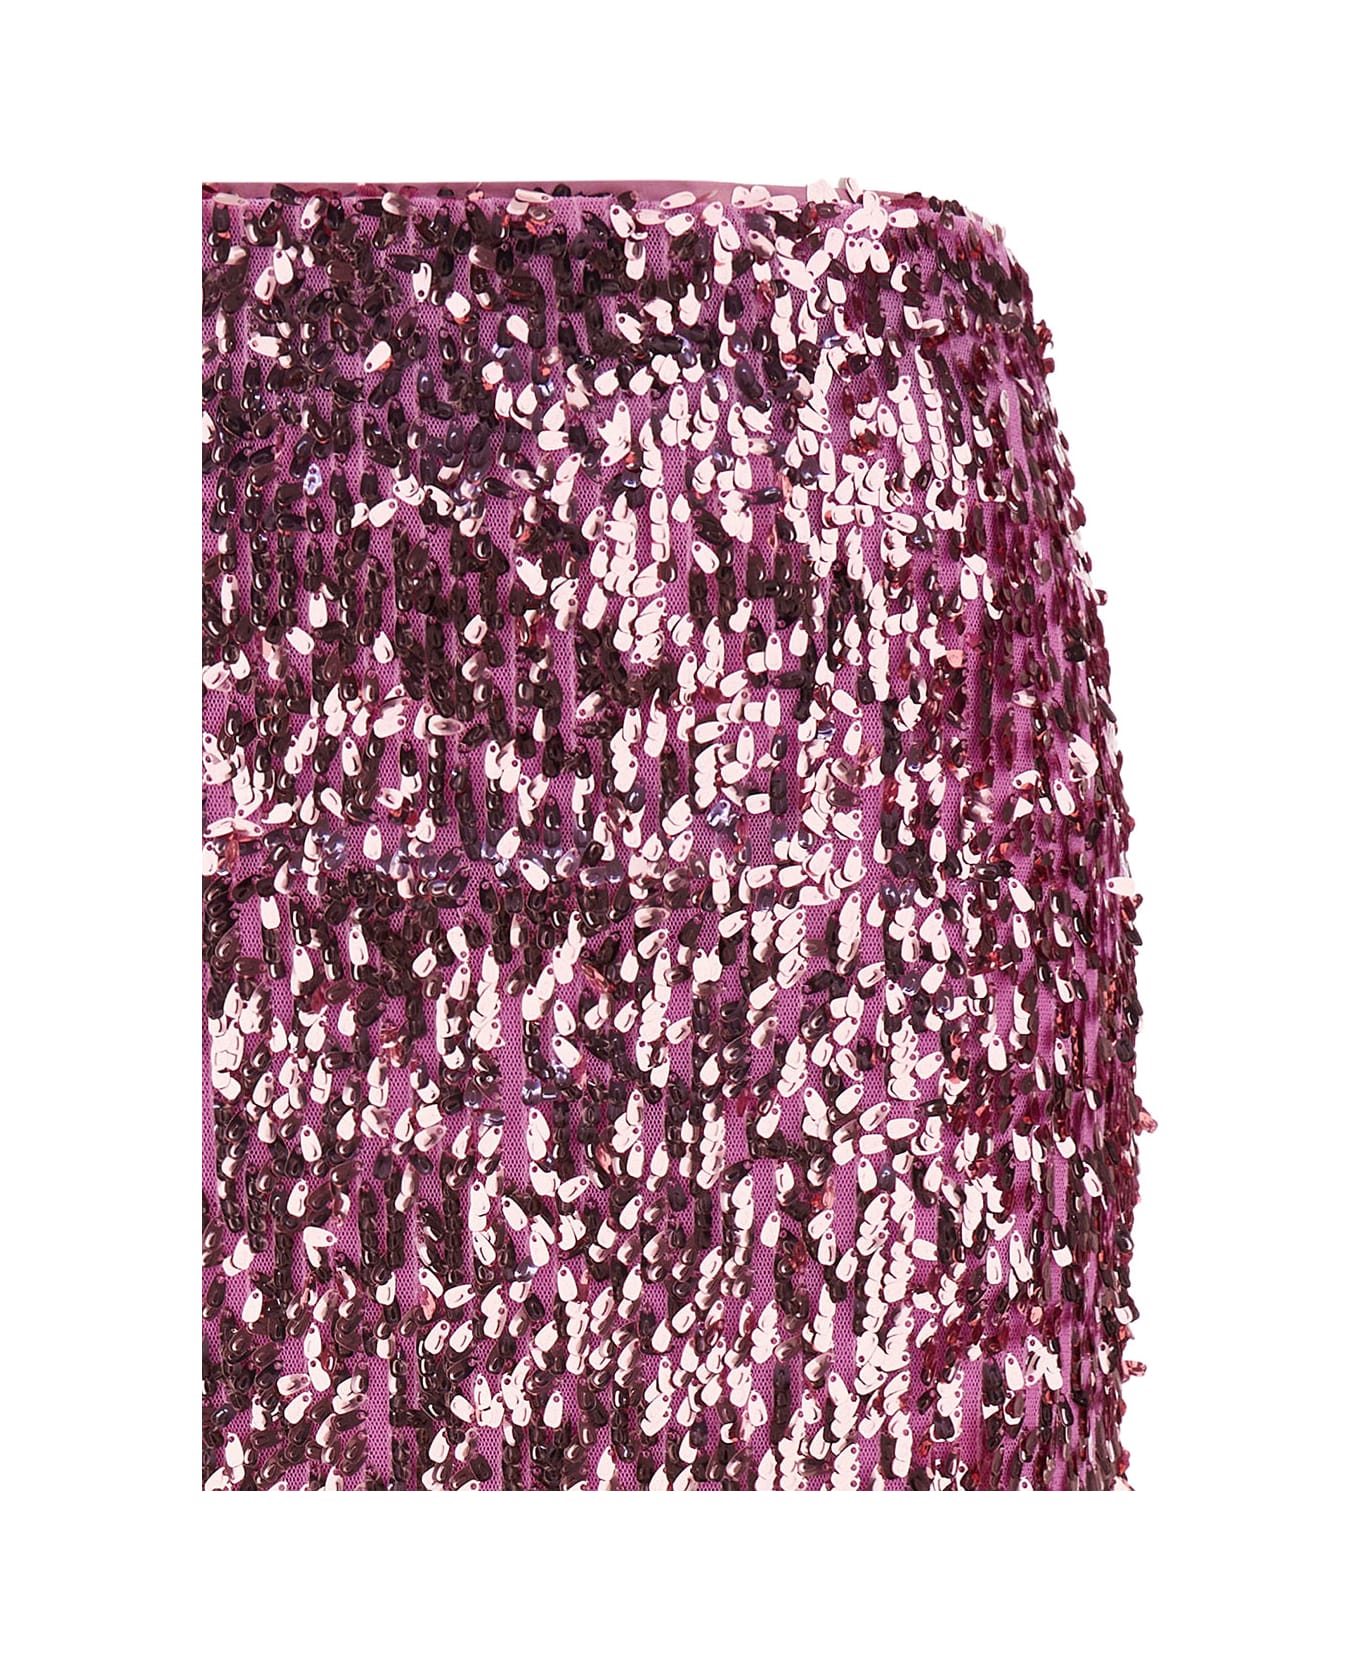 Rotate by Birger Christensen Pink Pencil Skirt With All-over Sequins Embellishment In Tech Fabric Woman - Pink